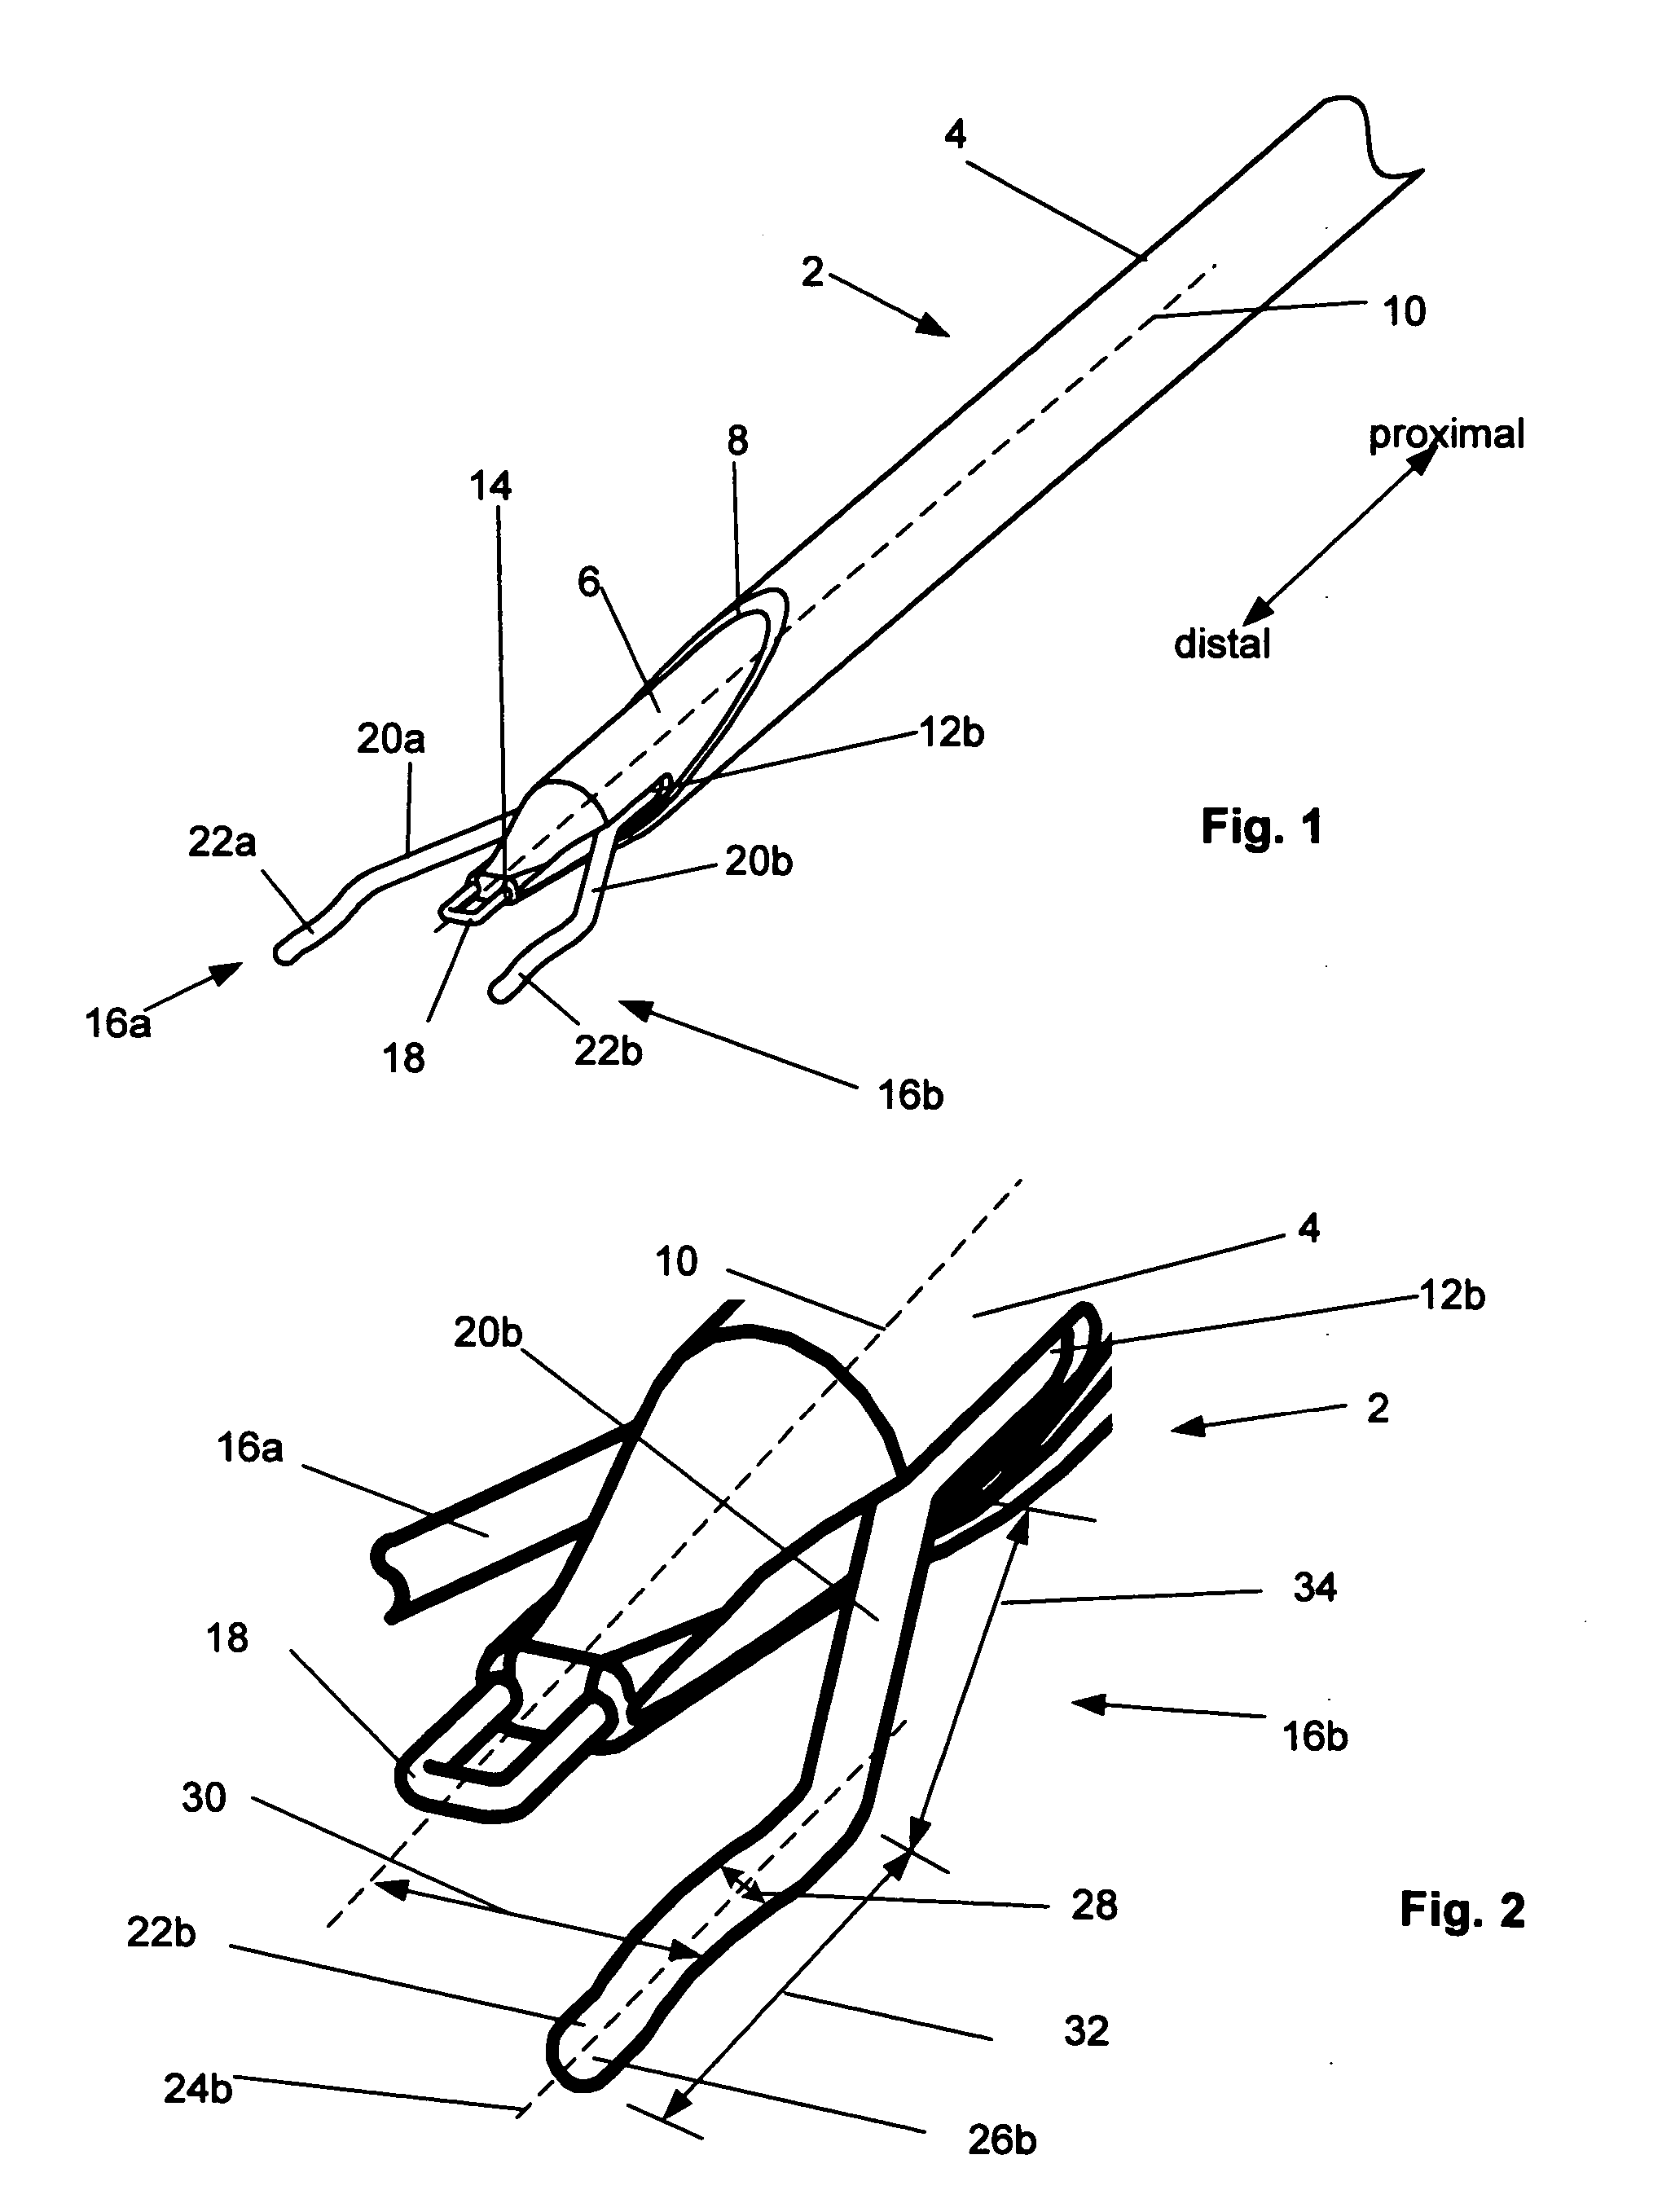 Biological tissue closure device and method